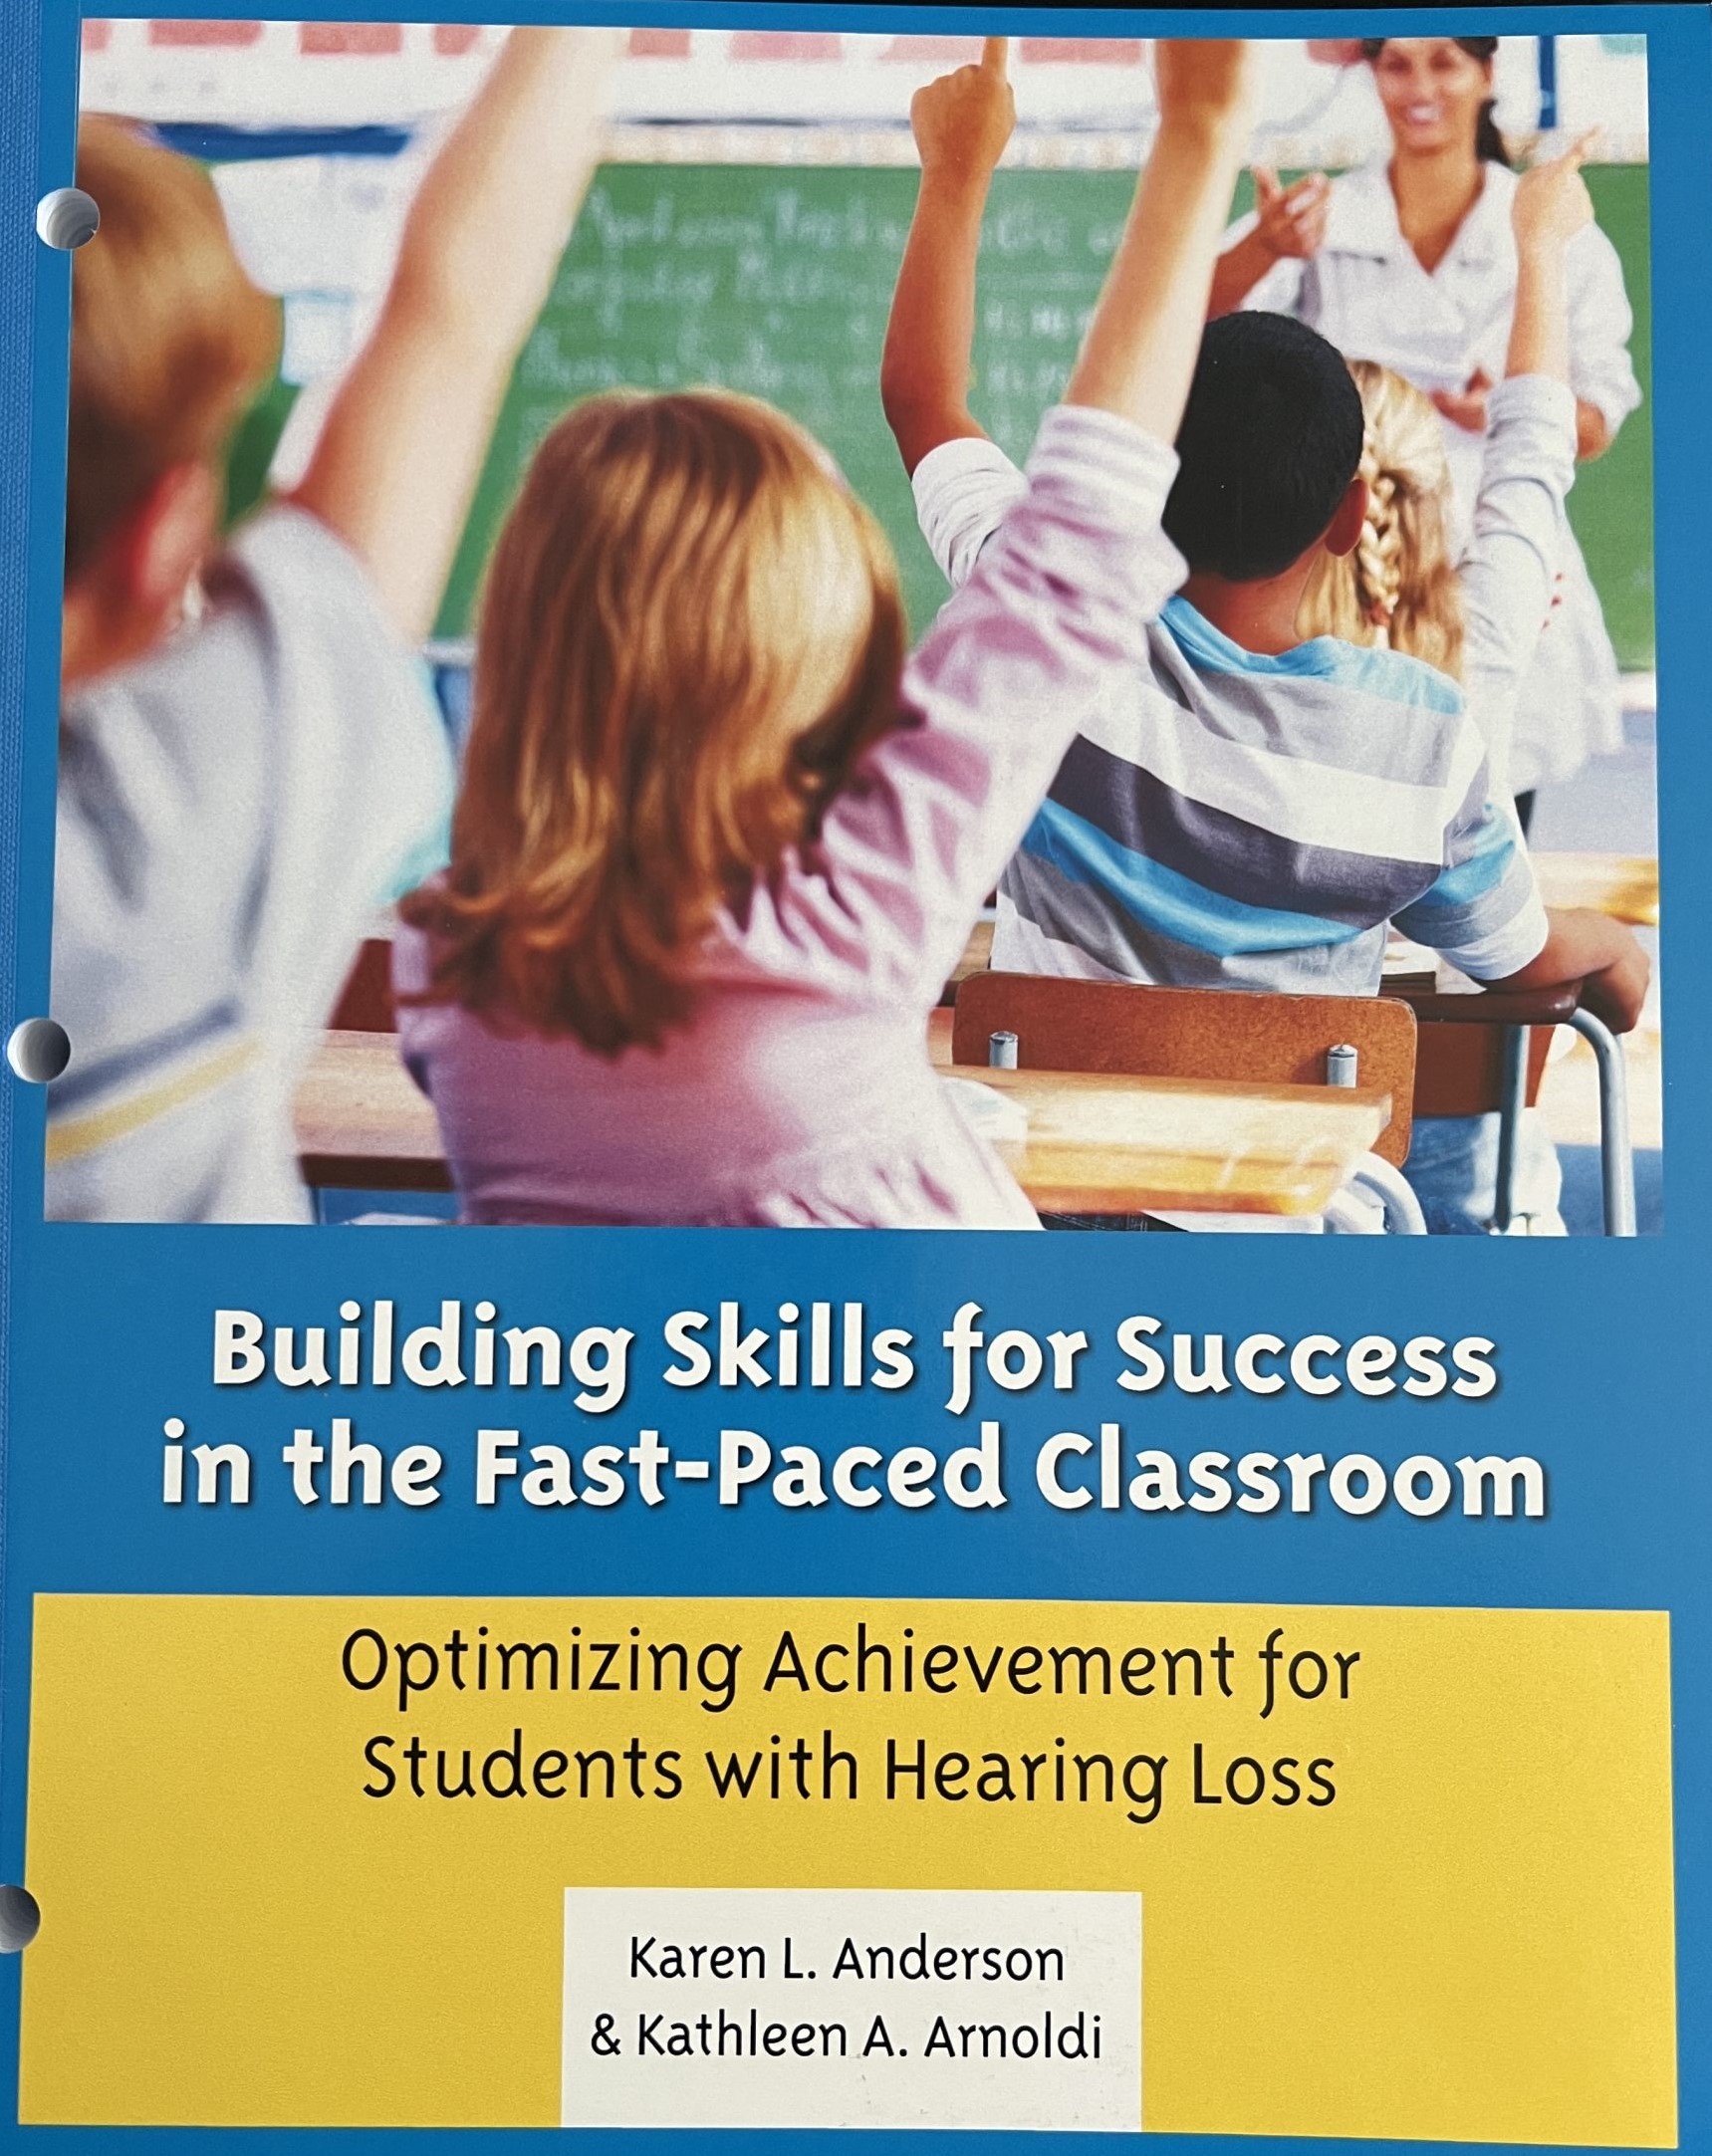 The cover of the book "Building Skills for Success in the Fas-Paced Classroom" features the title in the center on a blue background. Above, a group of students are sitting in a classroom raising their hands with a smiling teacher standing at the front of the room.